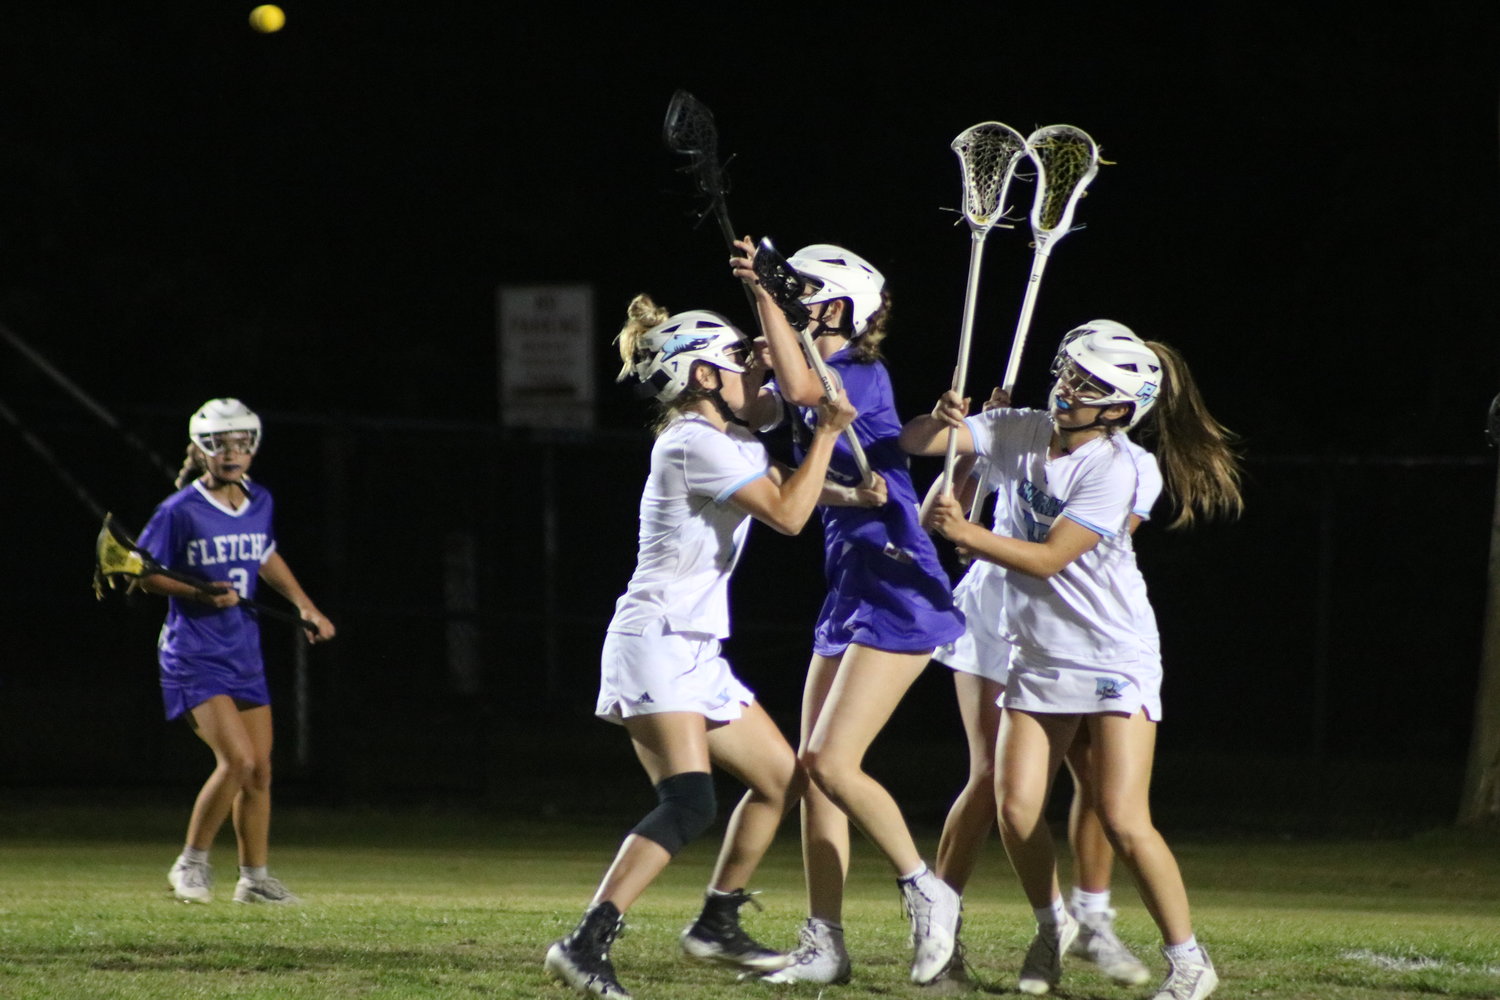 Ponte Vedra defenders swarm a Fletcher attacker. The Sharks allowed just five goals in two games during the district tournament.